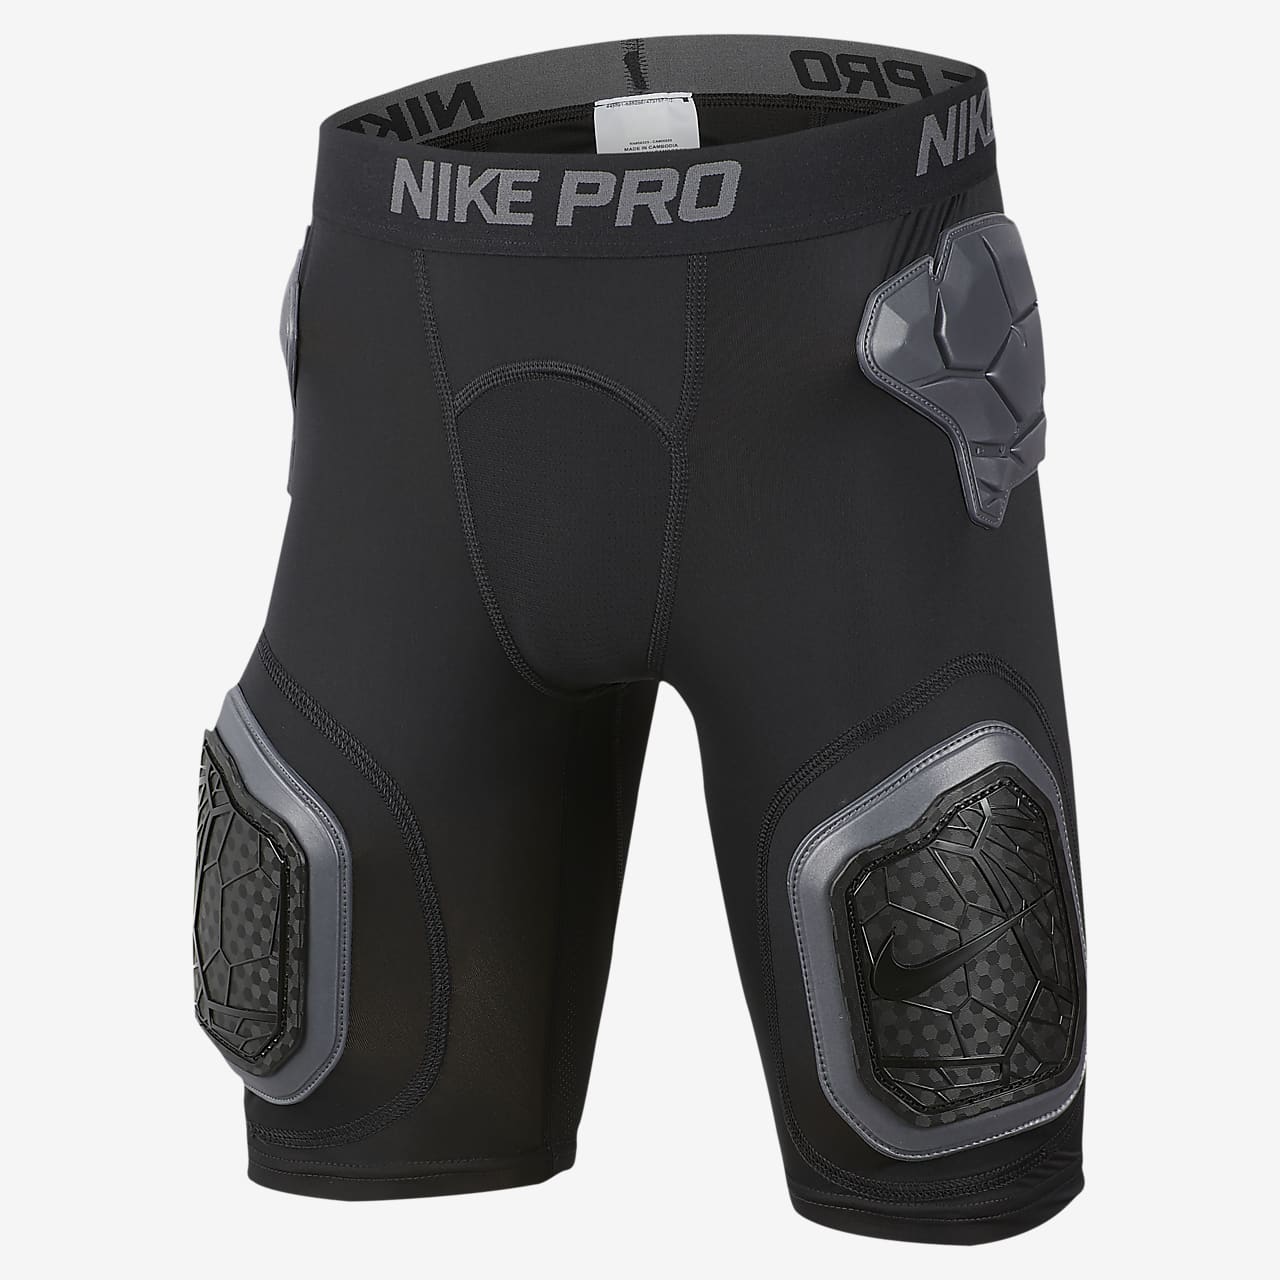 New with Tags, Men's Nike Pro Hyperstrong Football Girdle, size 3XL